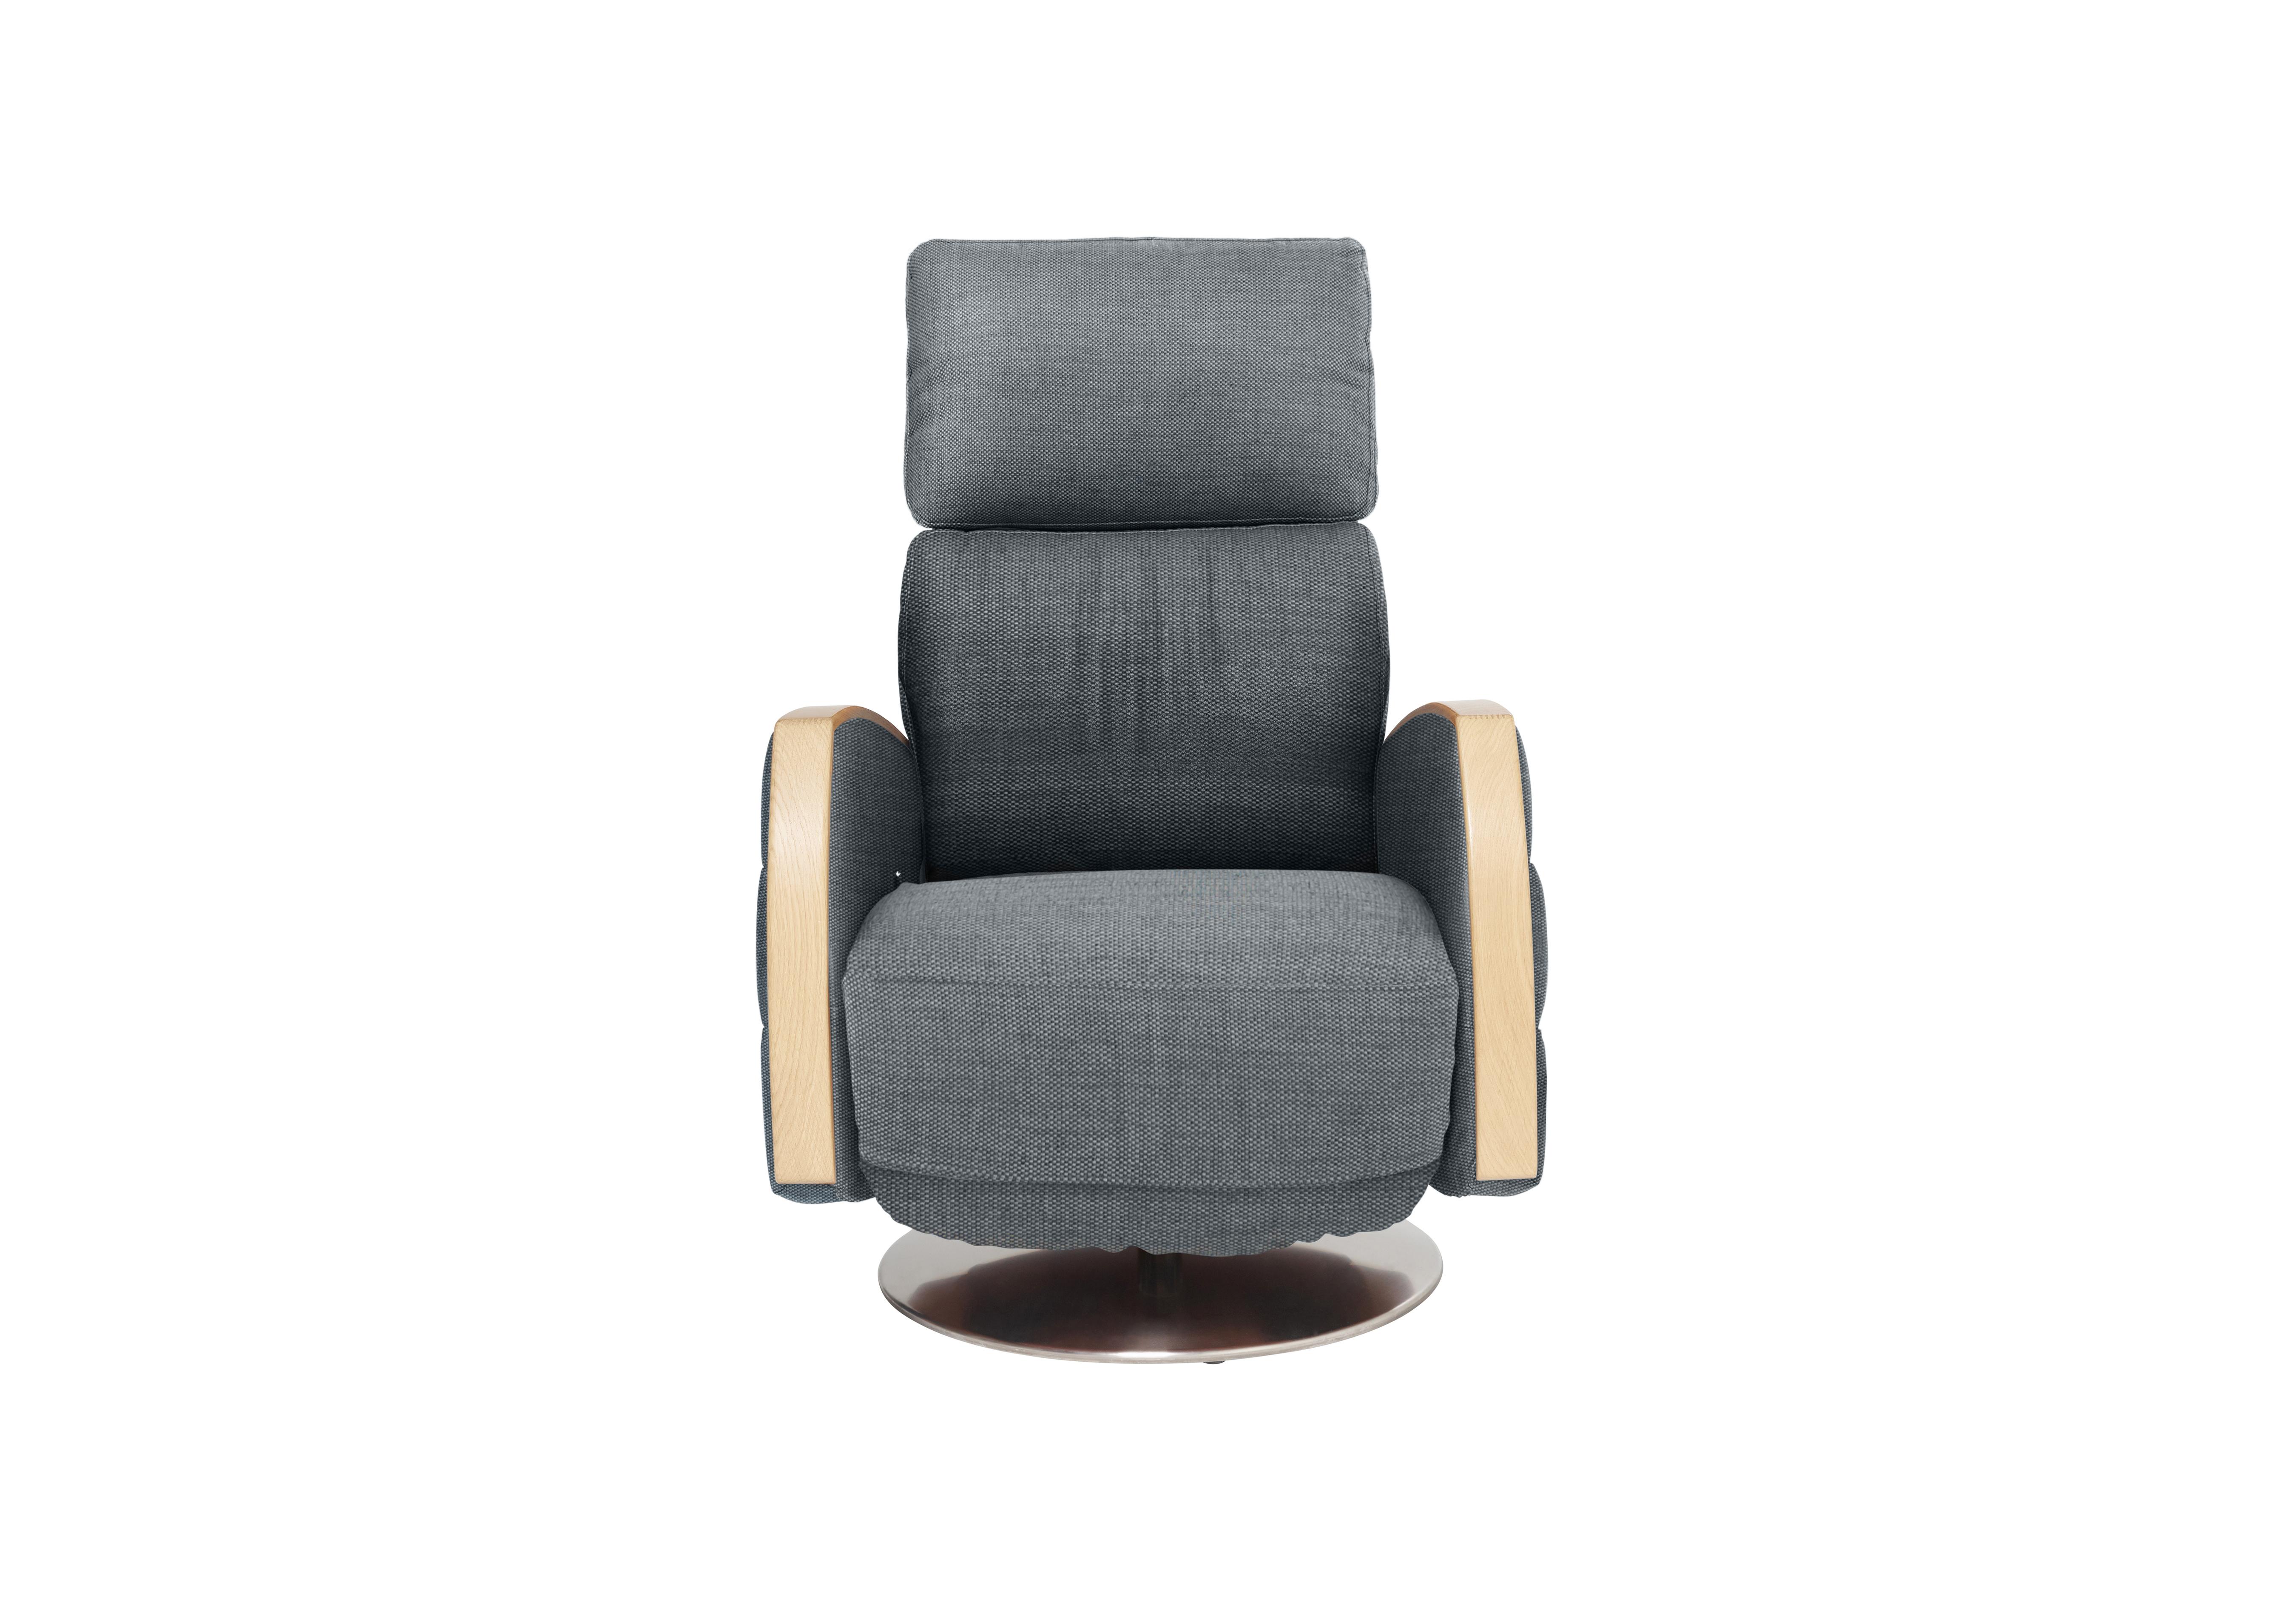 Noto Fabric Recliner Chair in P222 on Furniture Village